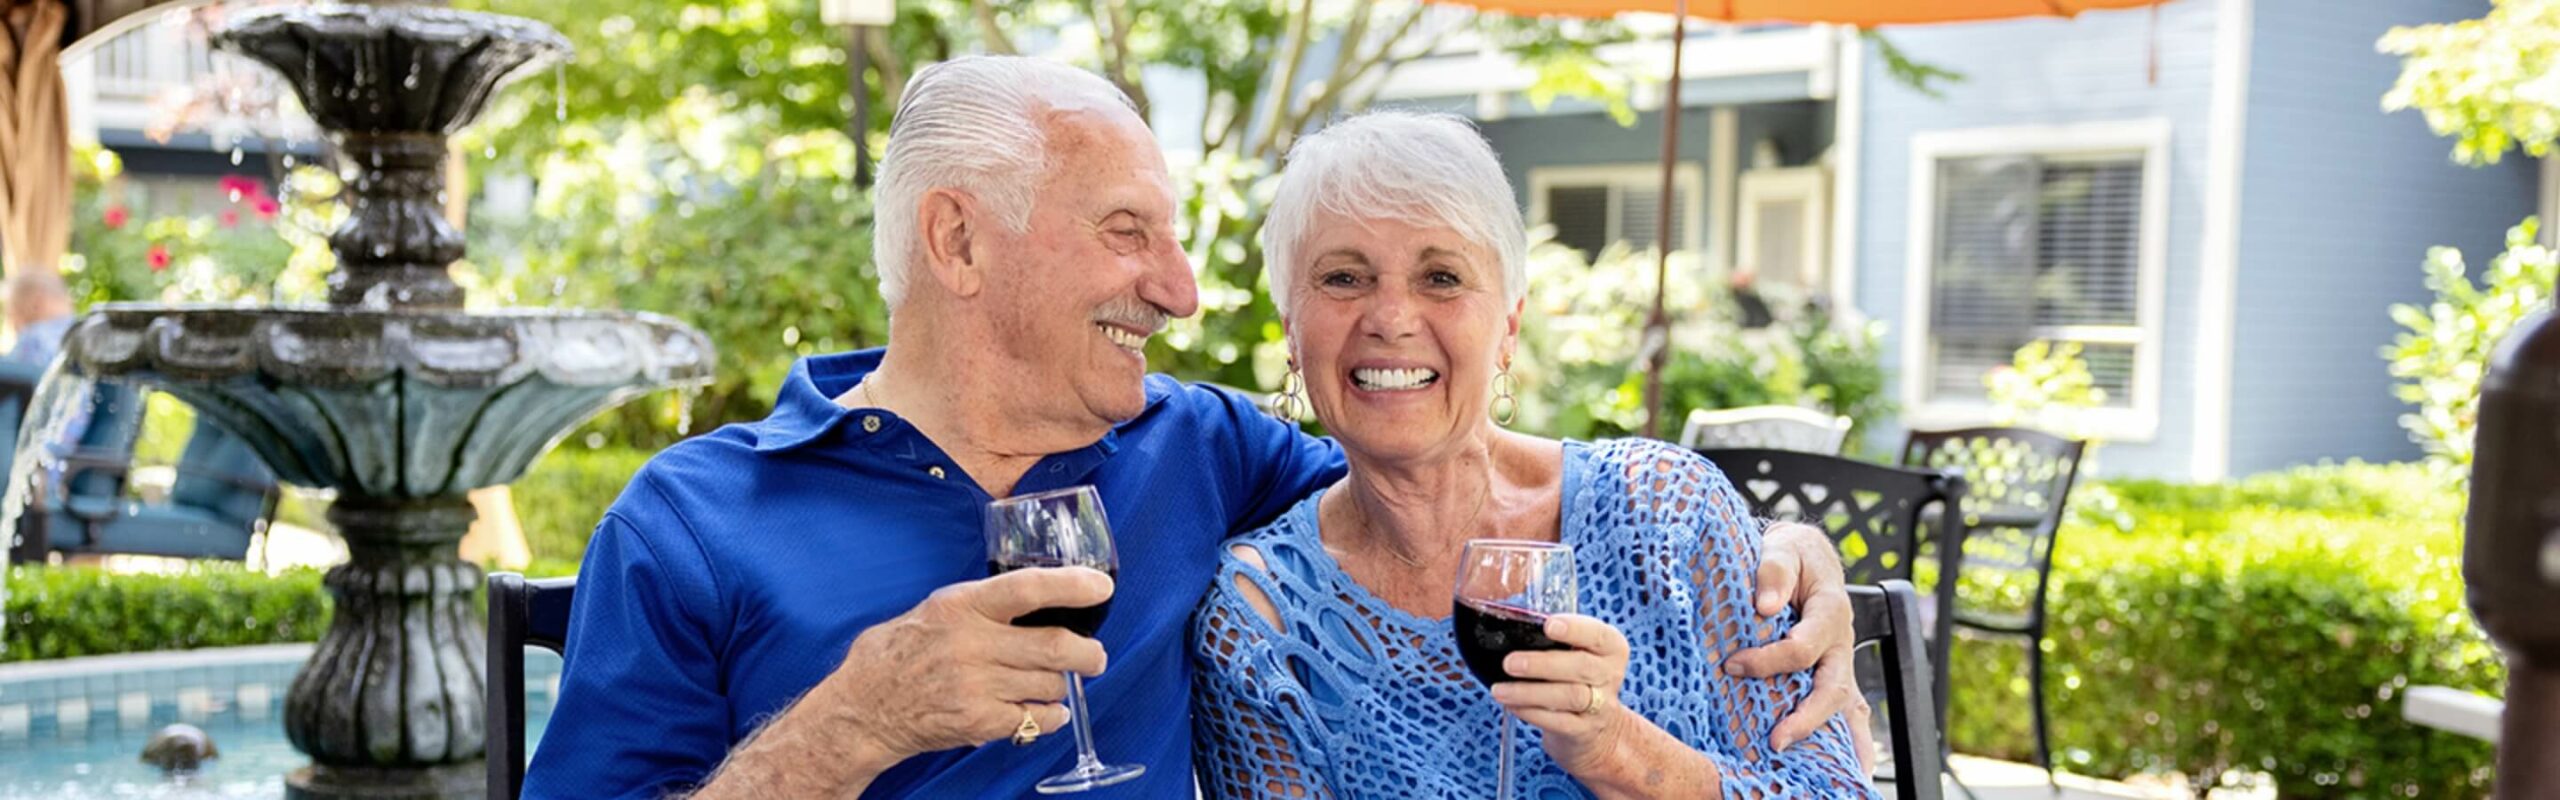 An elderly couple share a cheerful toast with glasses of red wine, seated by a fountain in a lush garden setting, expressing the joy and relaxation of life at Carlton Senior Living.